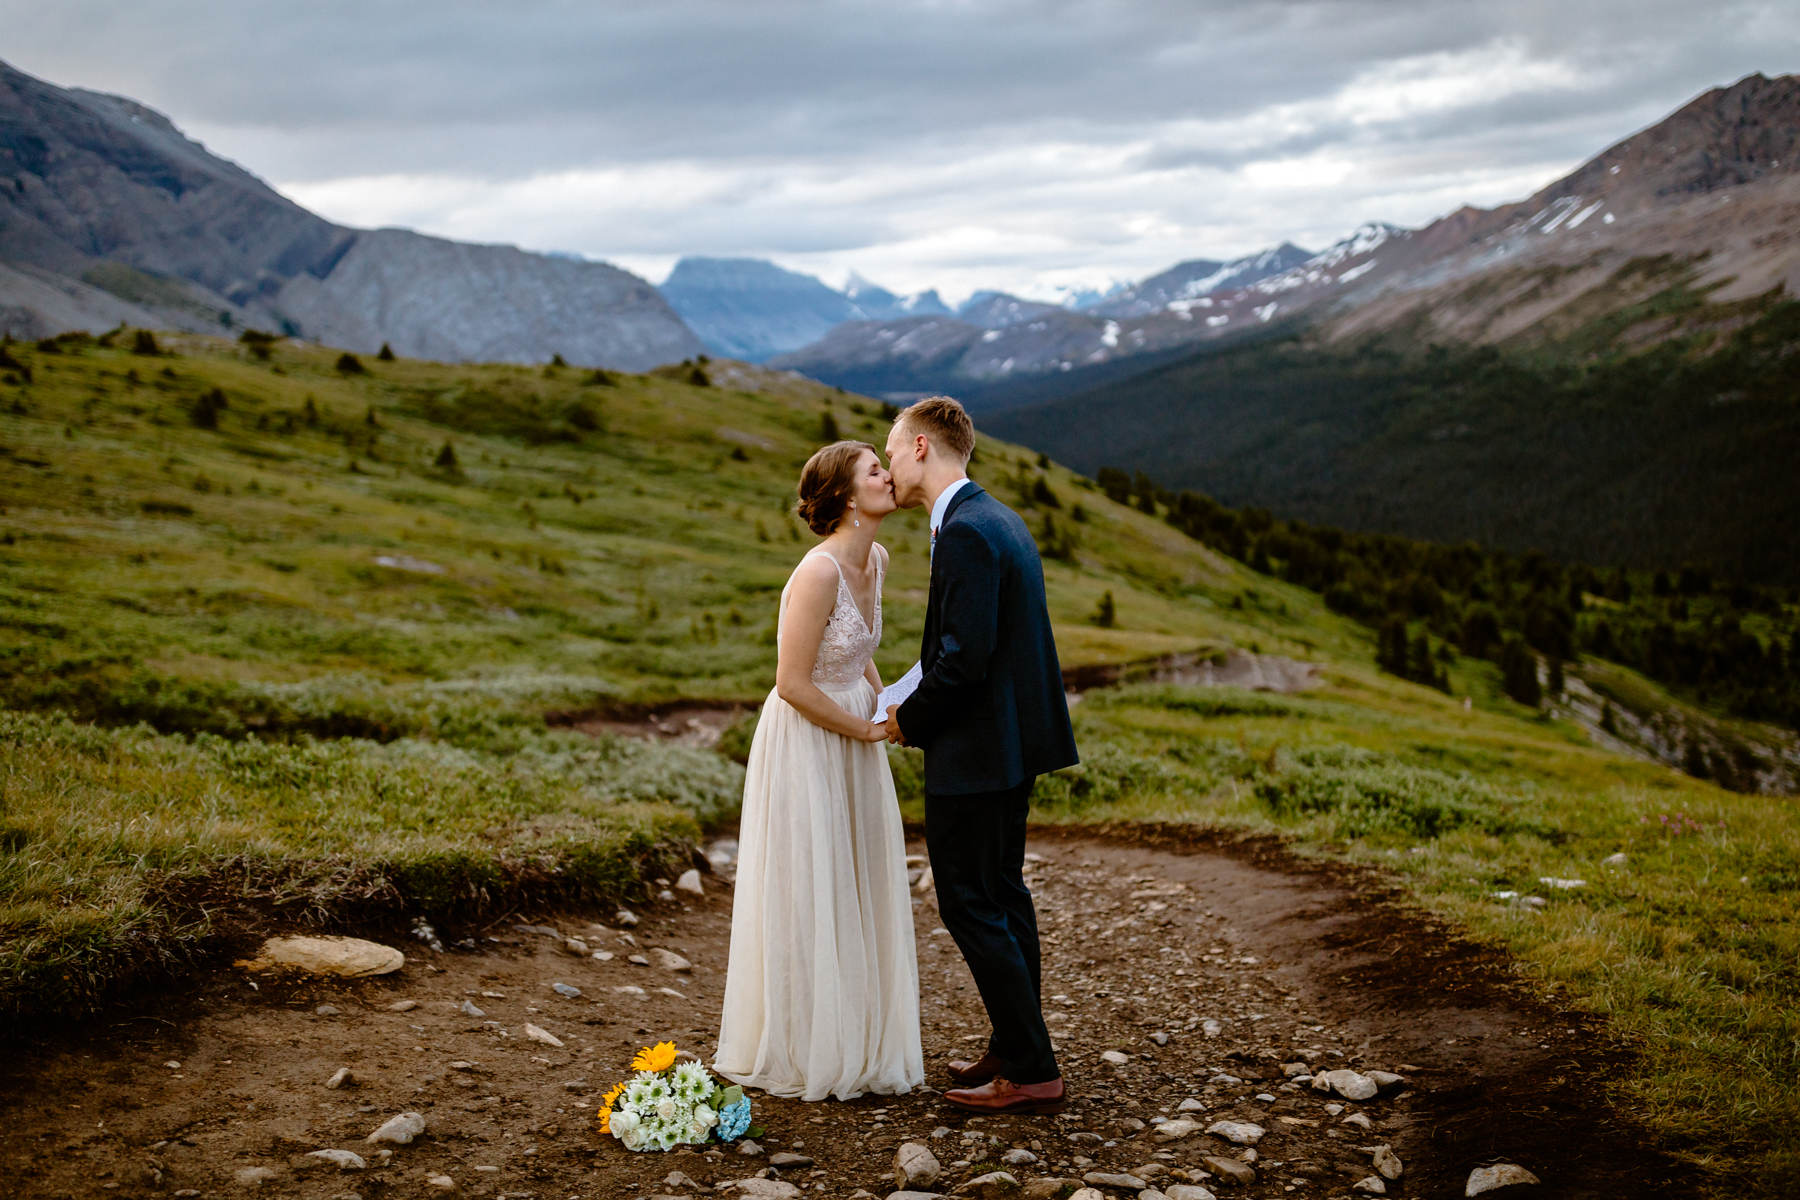 Hiking Elopement Photographers in Banff National Park - Photo 13